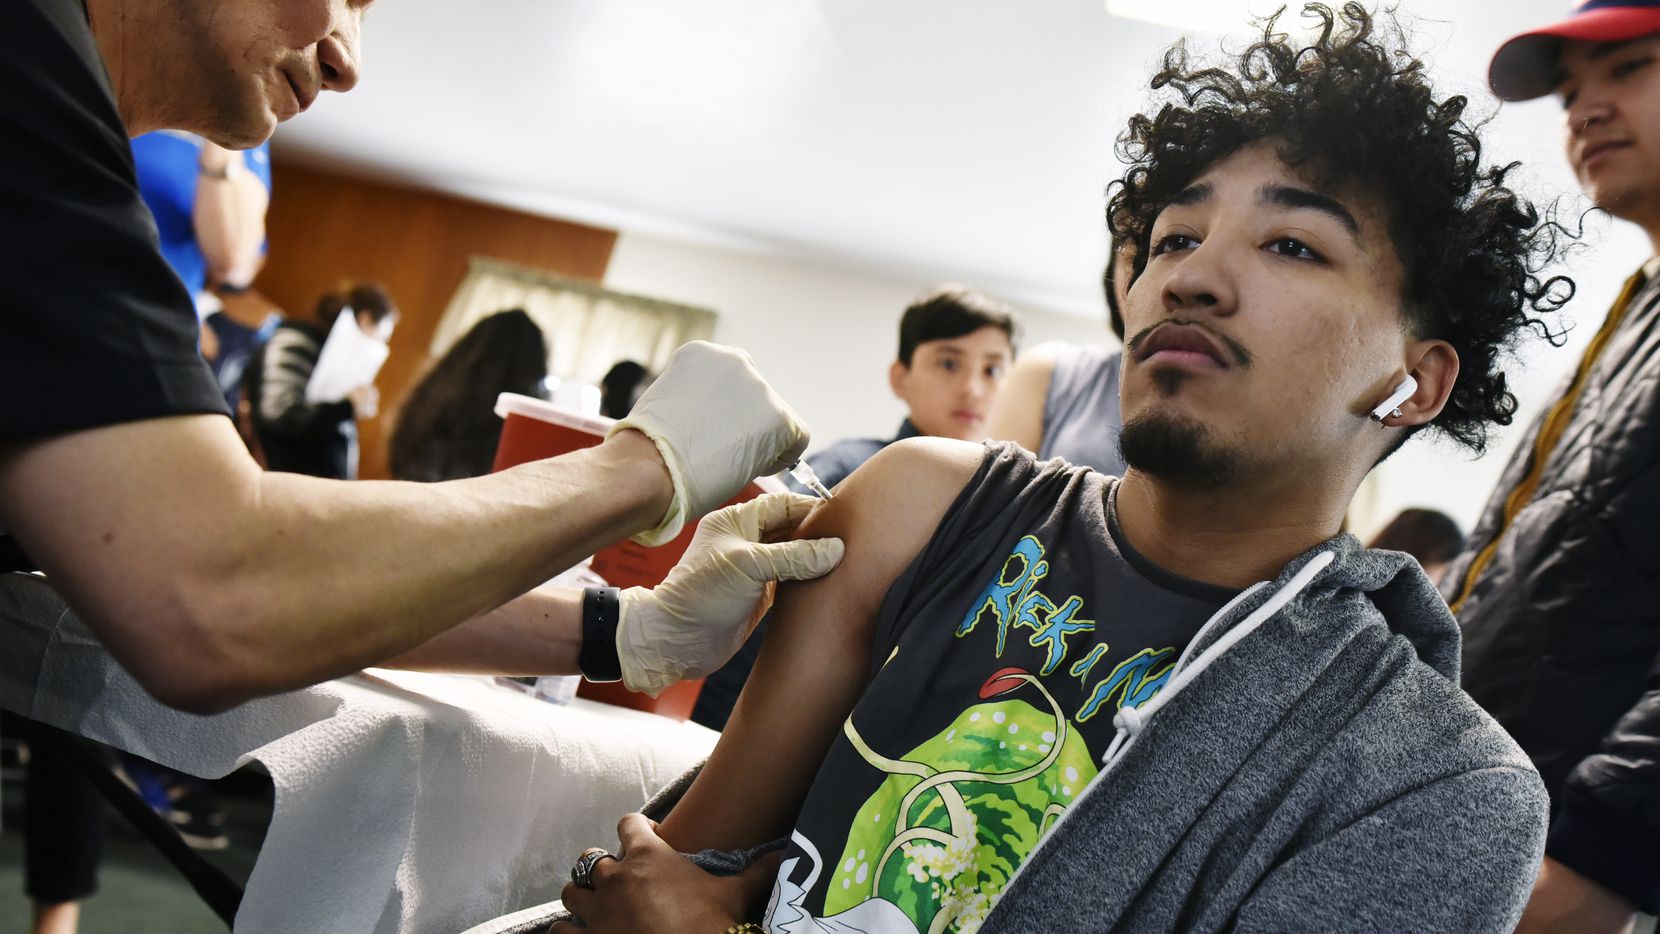 Alan Calvillo received a flu shot during a January health fair in Dallas. The Dallas-Fort Worth region has high health care prices and usage of health services has declined, according to a study of insurance claims.